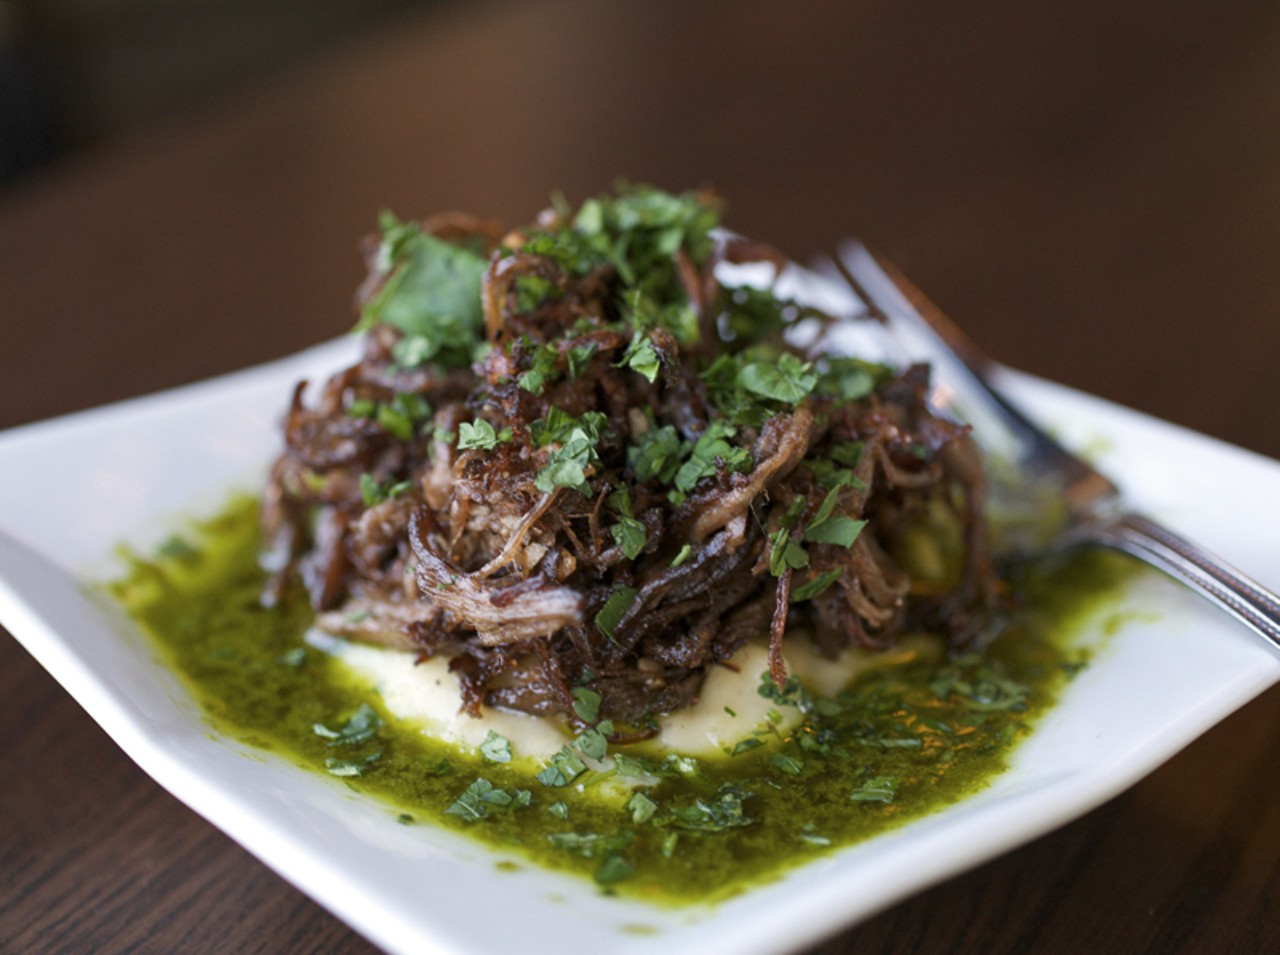 The Vaca Frita with Chimichurri is flash-fried, shredded Angus steak served atop a warm potato puree and garnished with a citrus herb sauce. With this, the suggested pairing is the Piedra Garnacha.